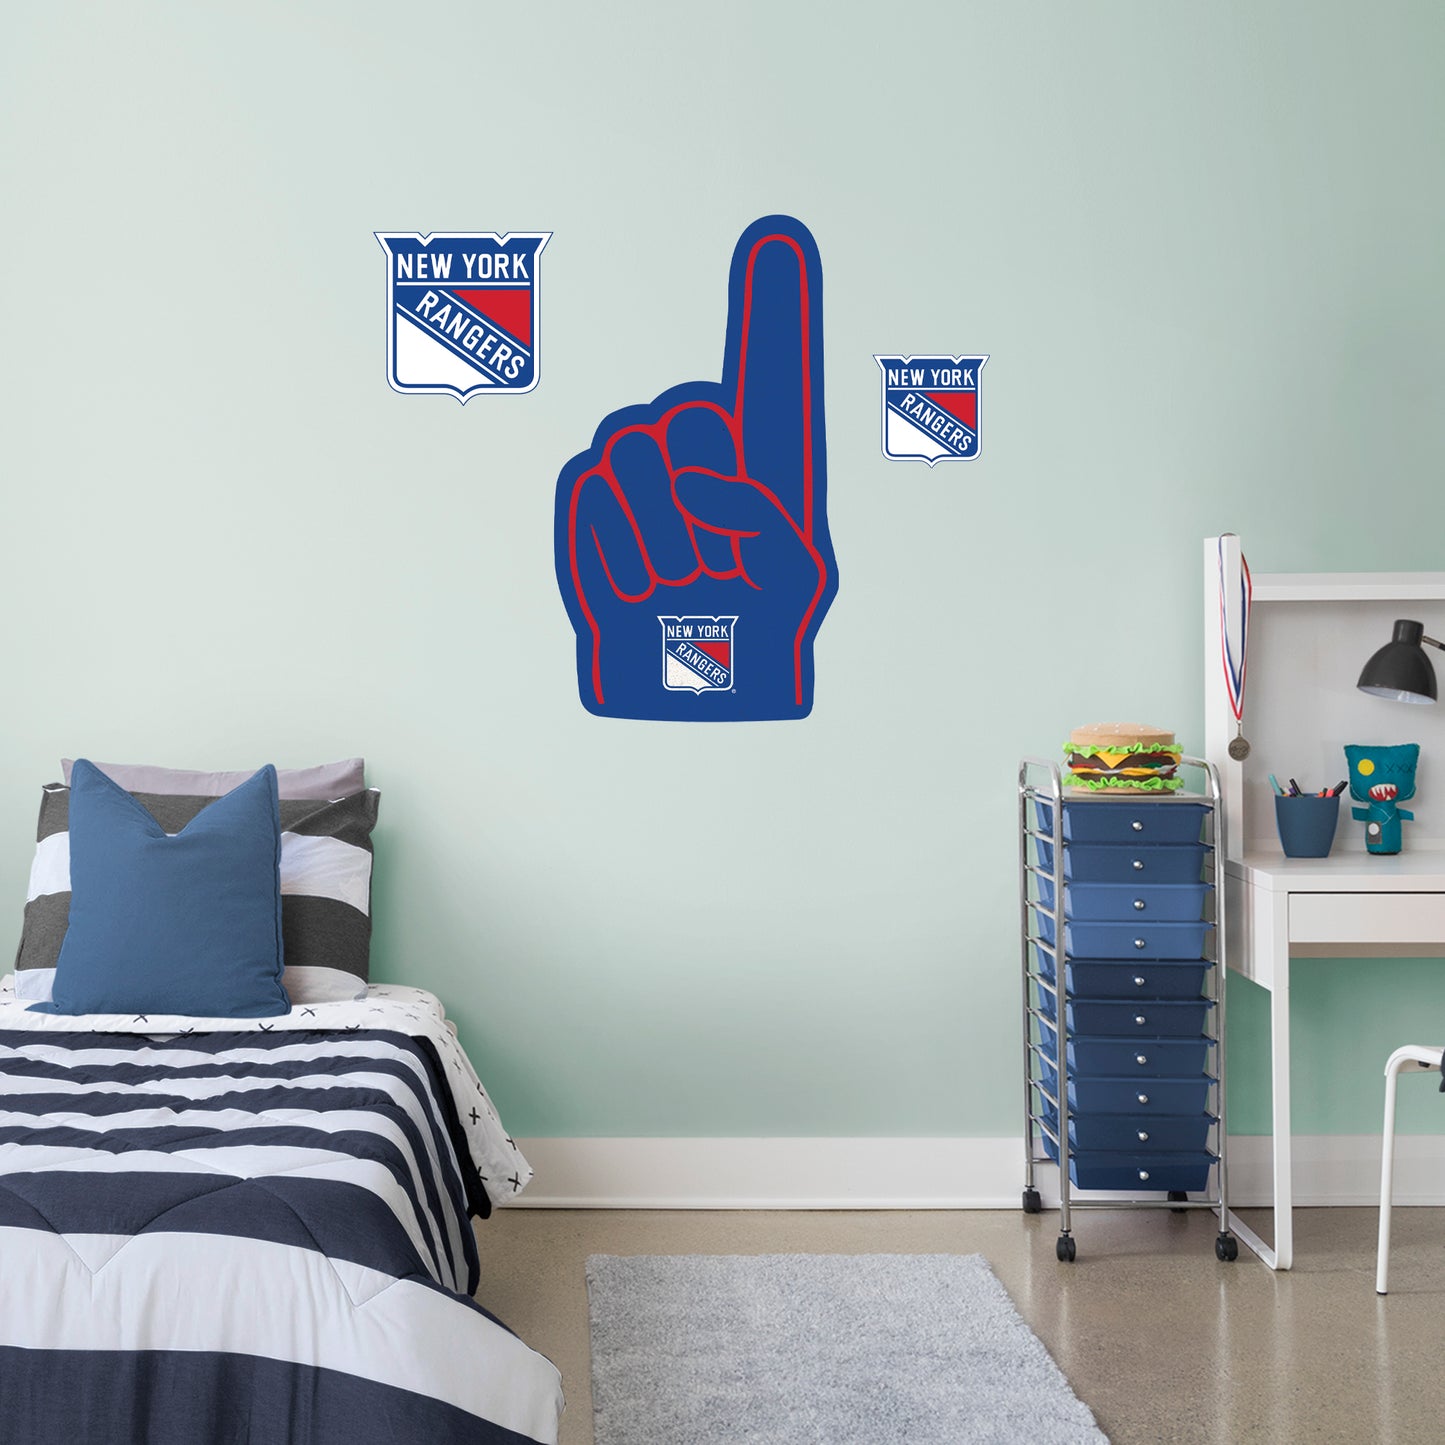 New York Rangers: Foam Finger - Officially Licensed NHL Removable Adhesive Decal